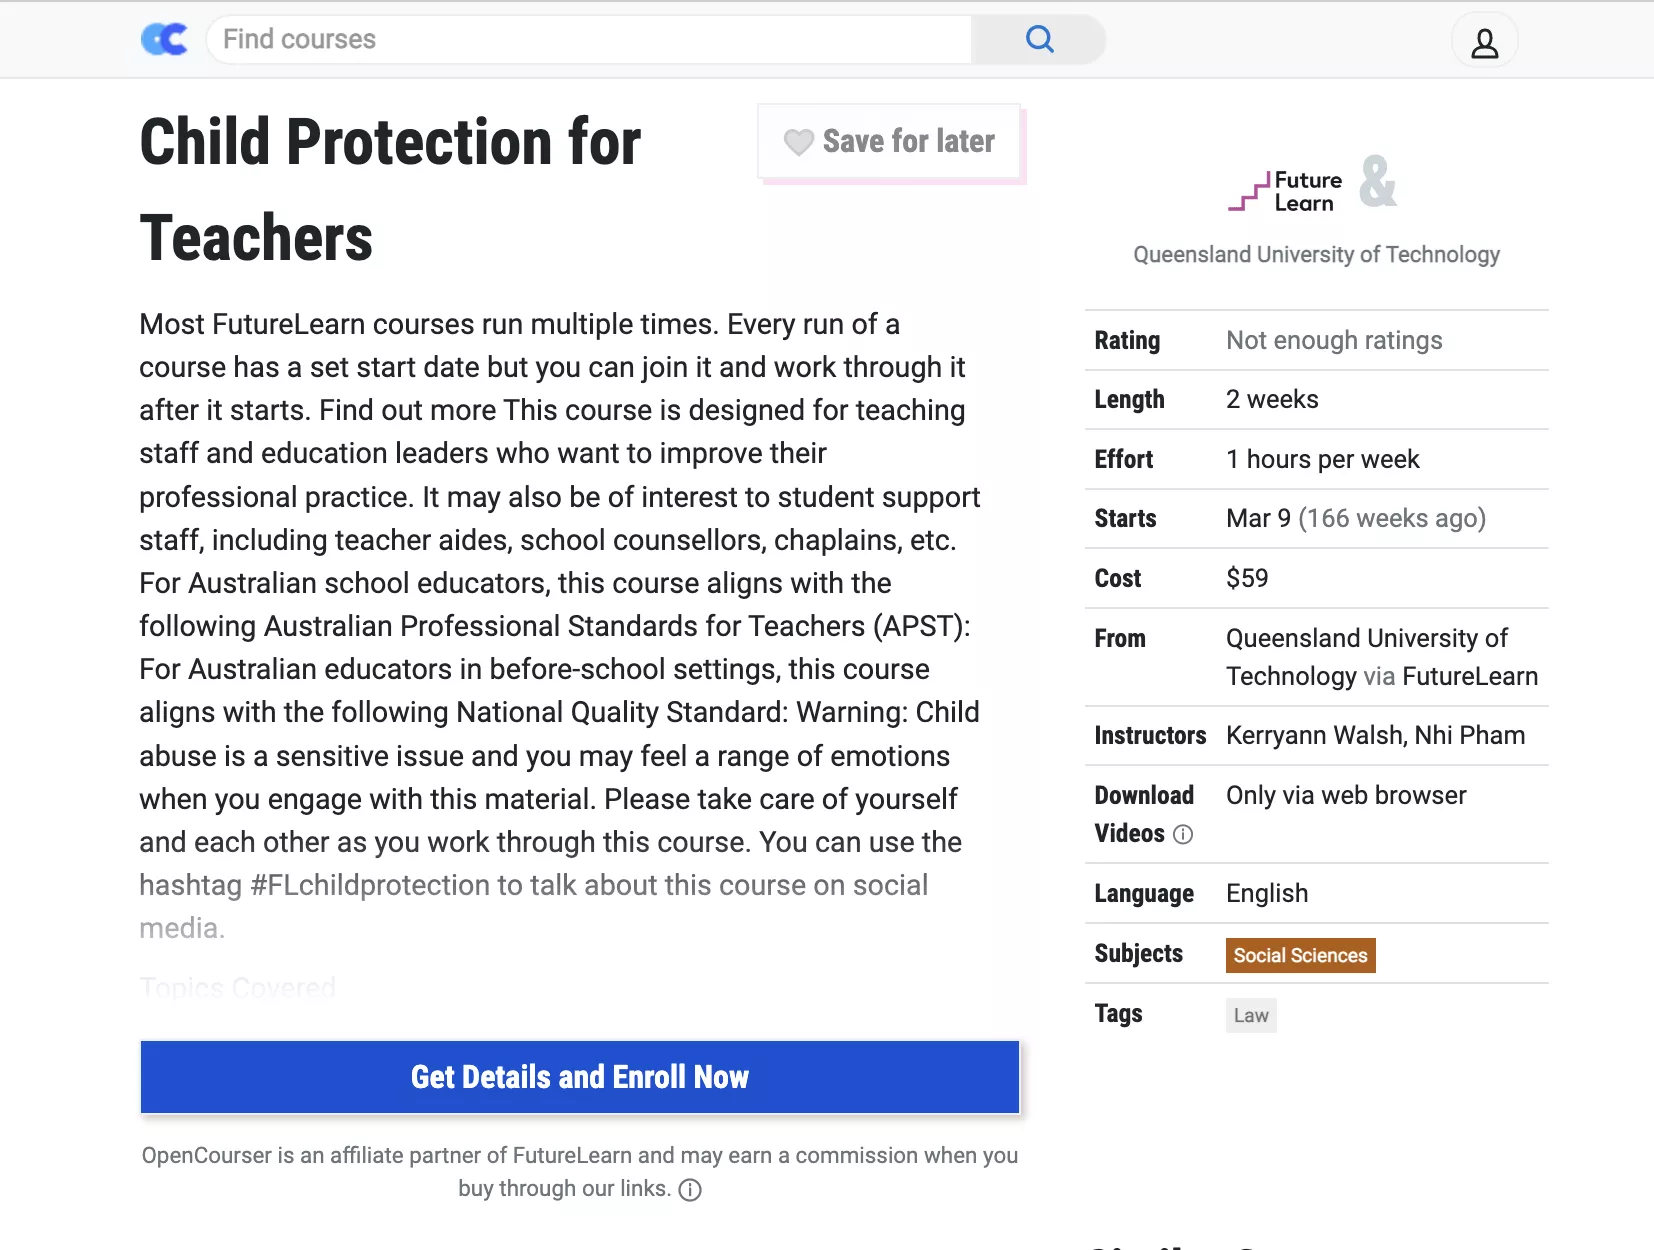 Child Protection for Teachers